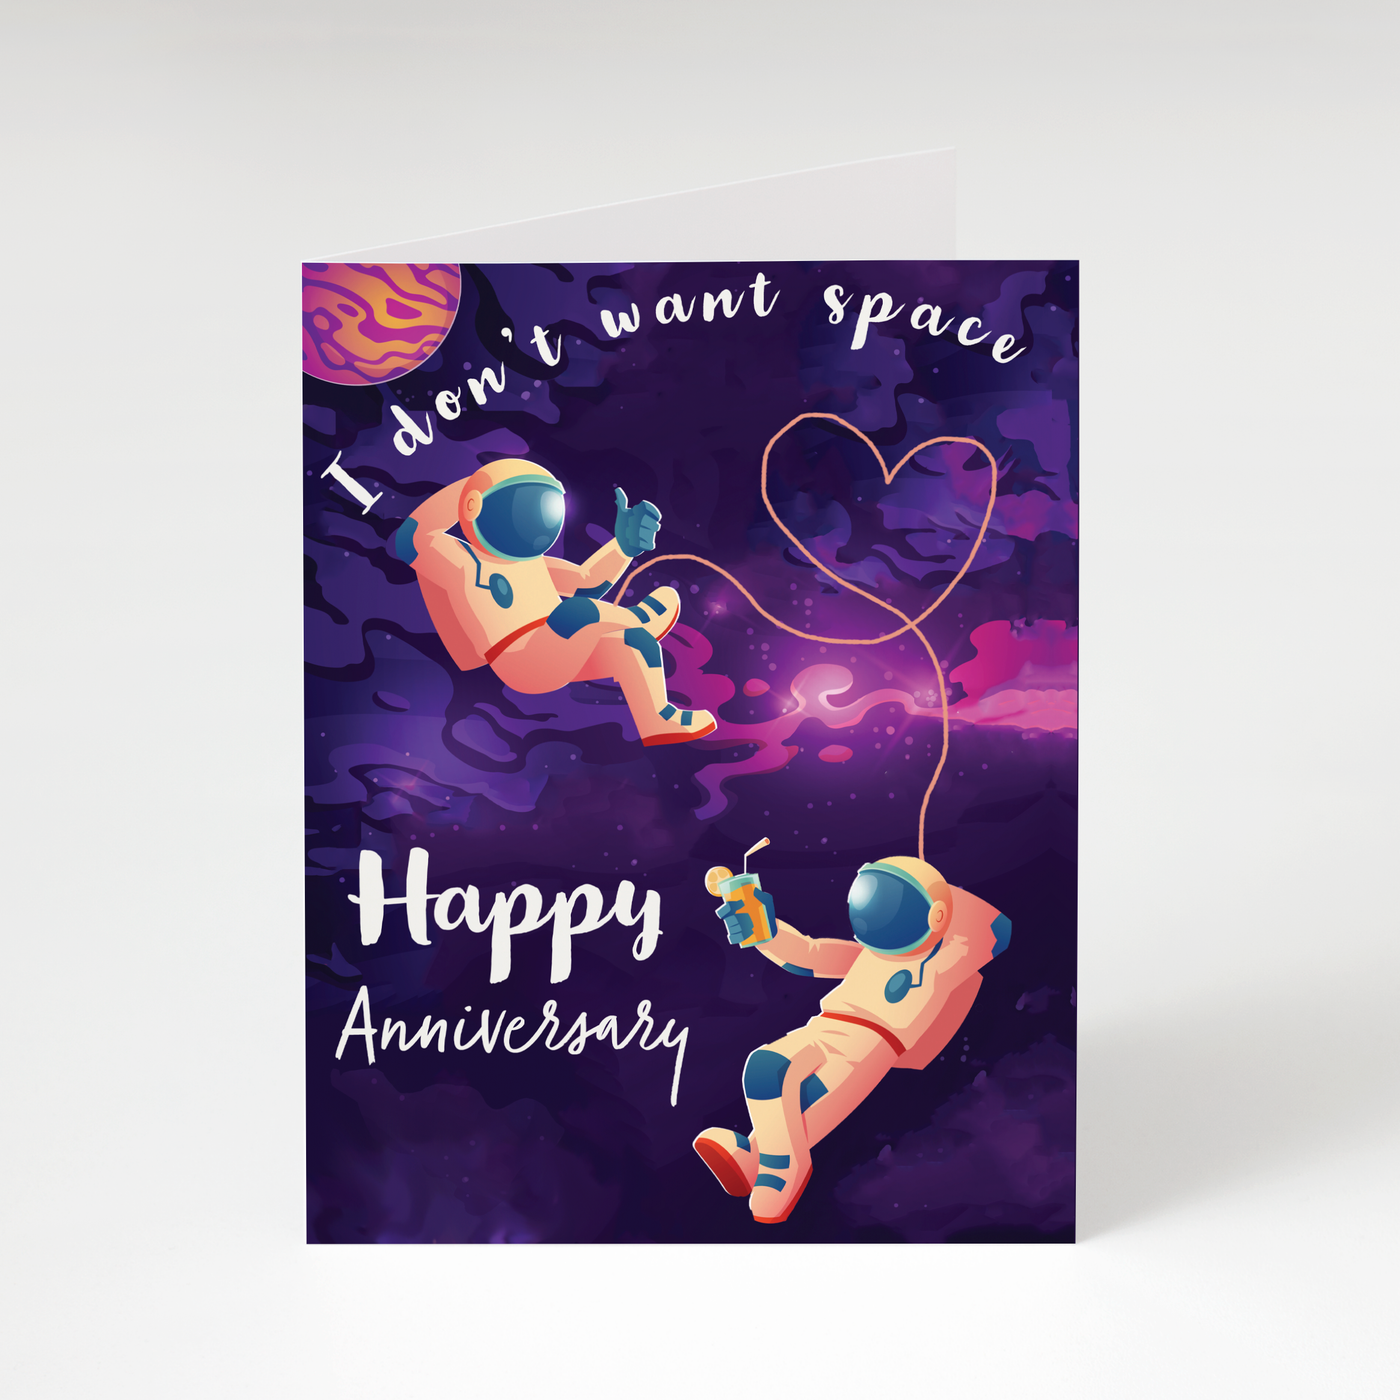 Don't Want Space - Anniversary Card